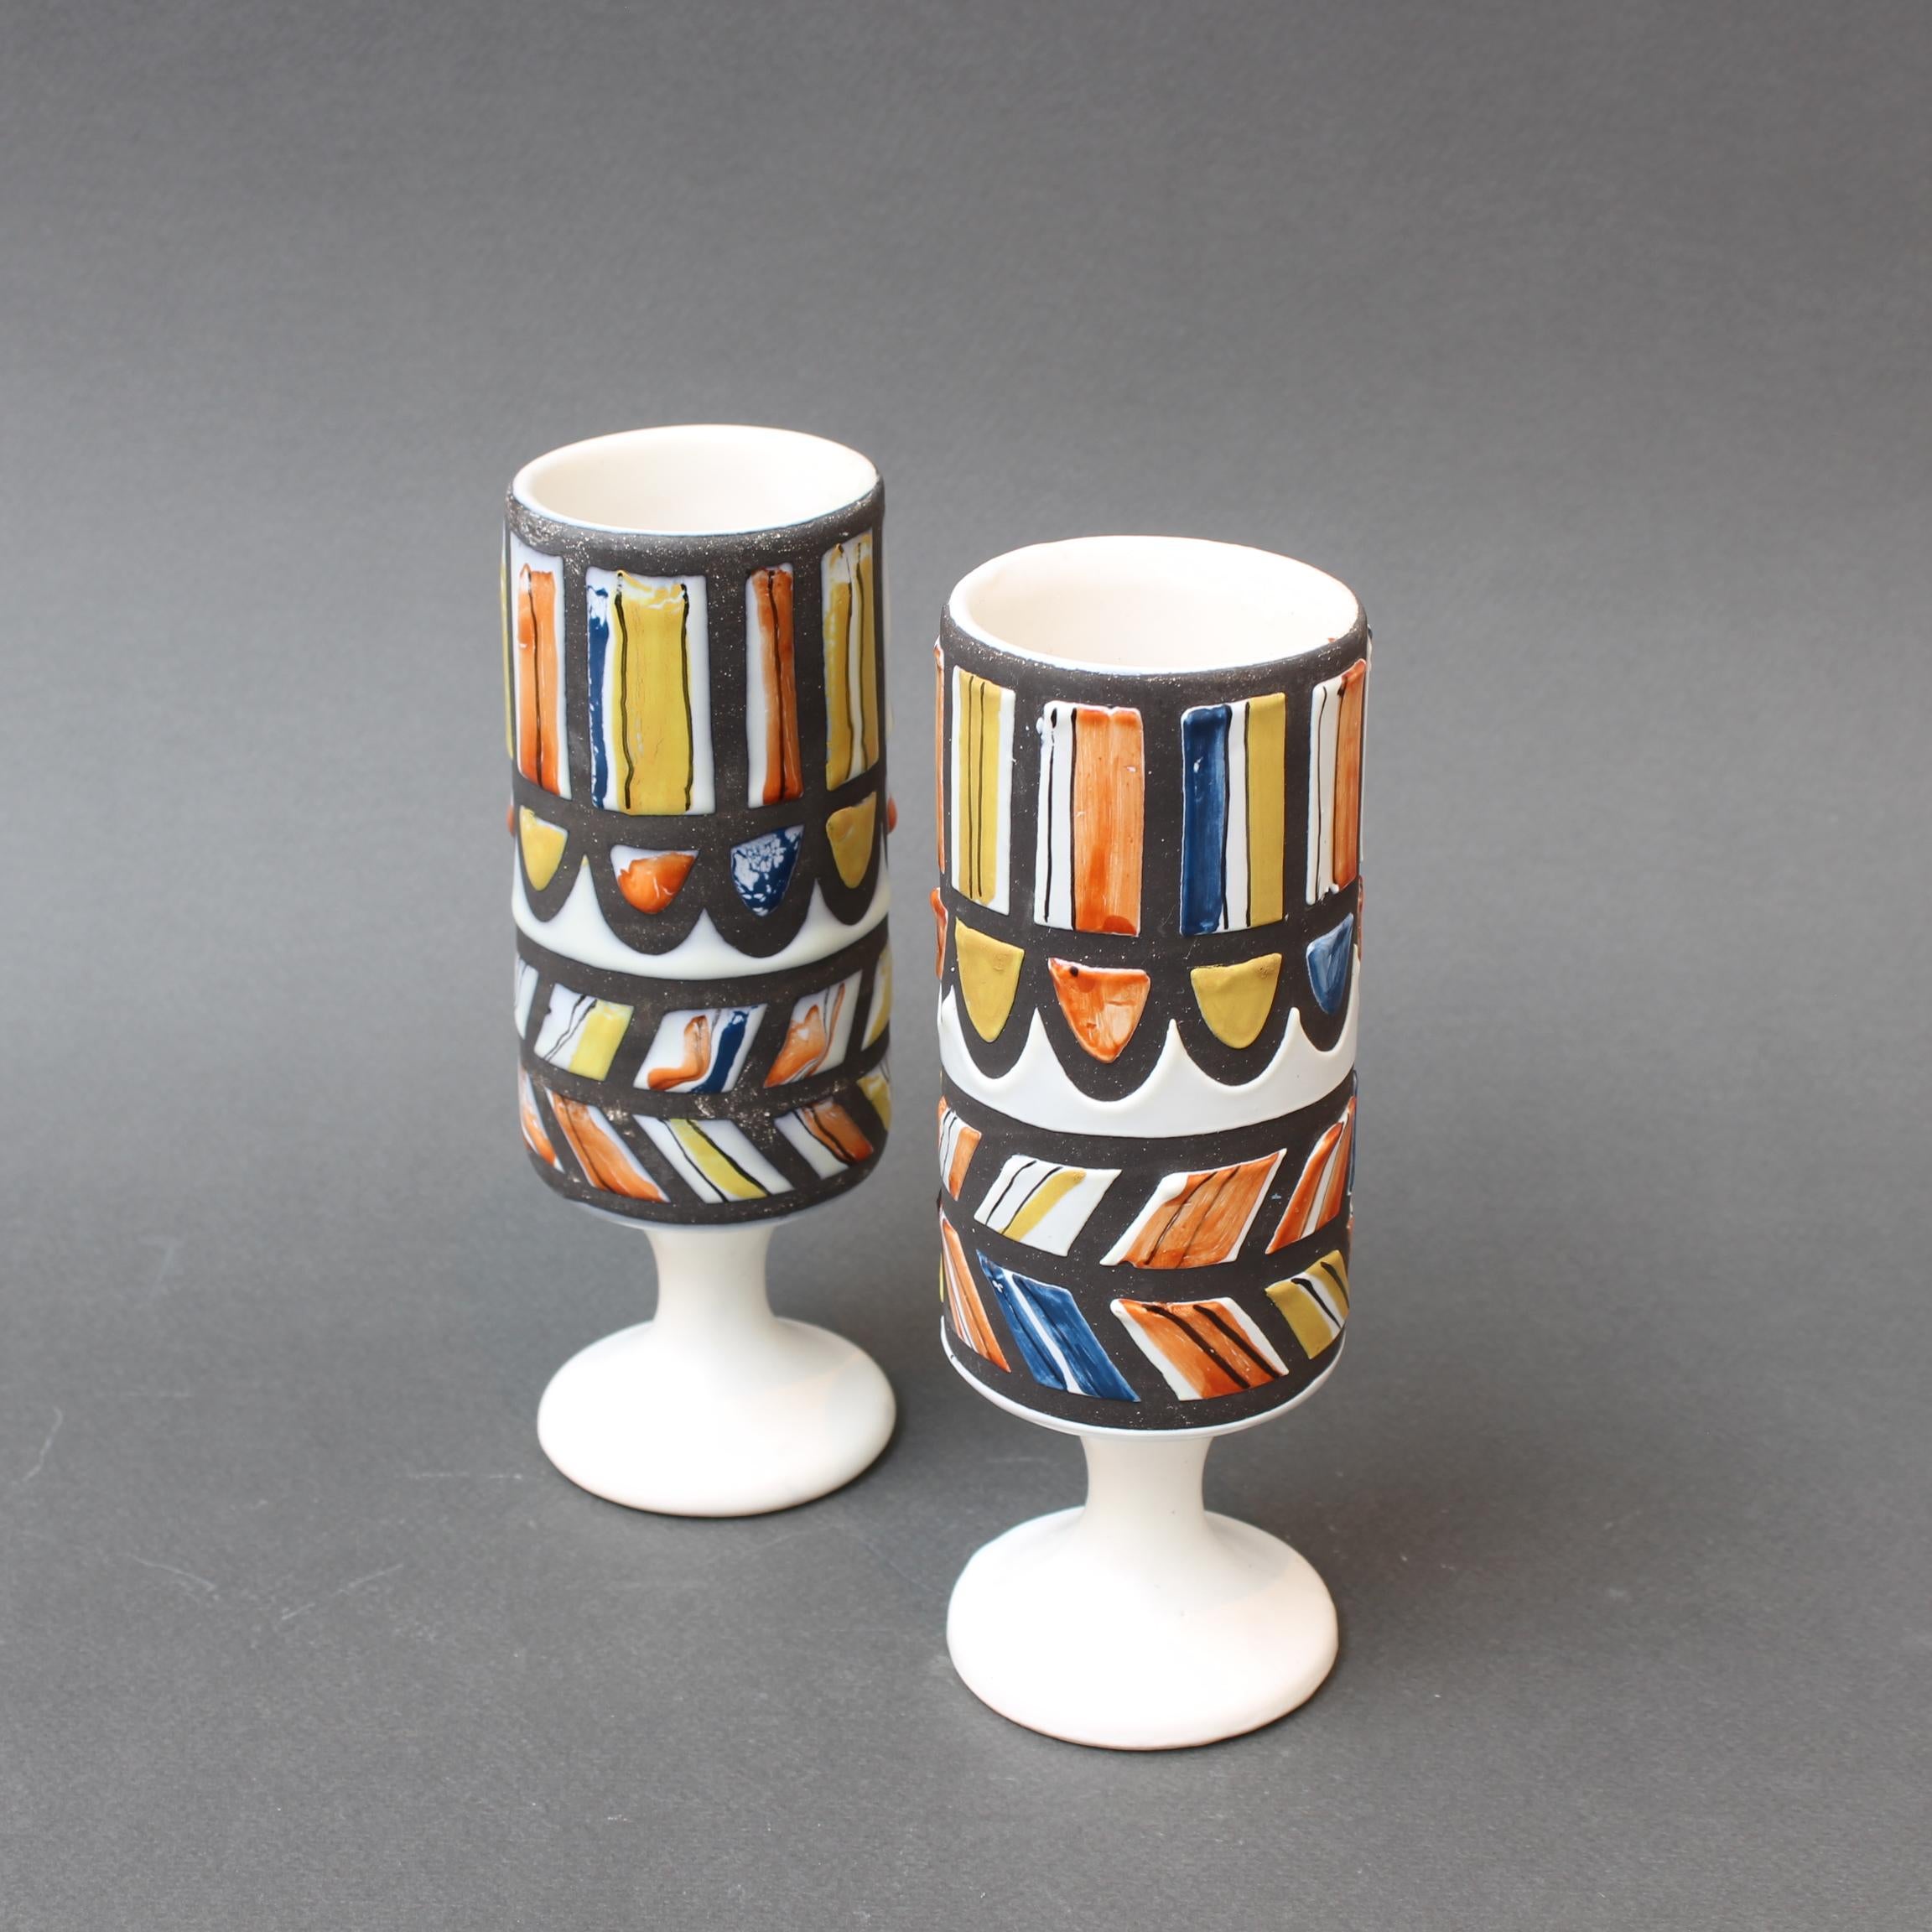 Vintage French Ceramic Set of Vessels by Roger Capron (circa 1960s) For Sale 12